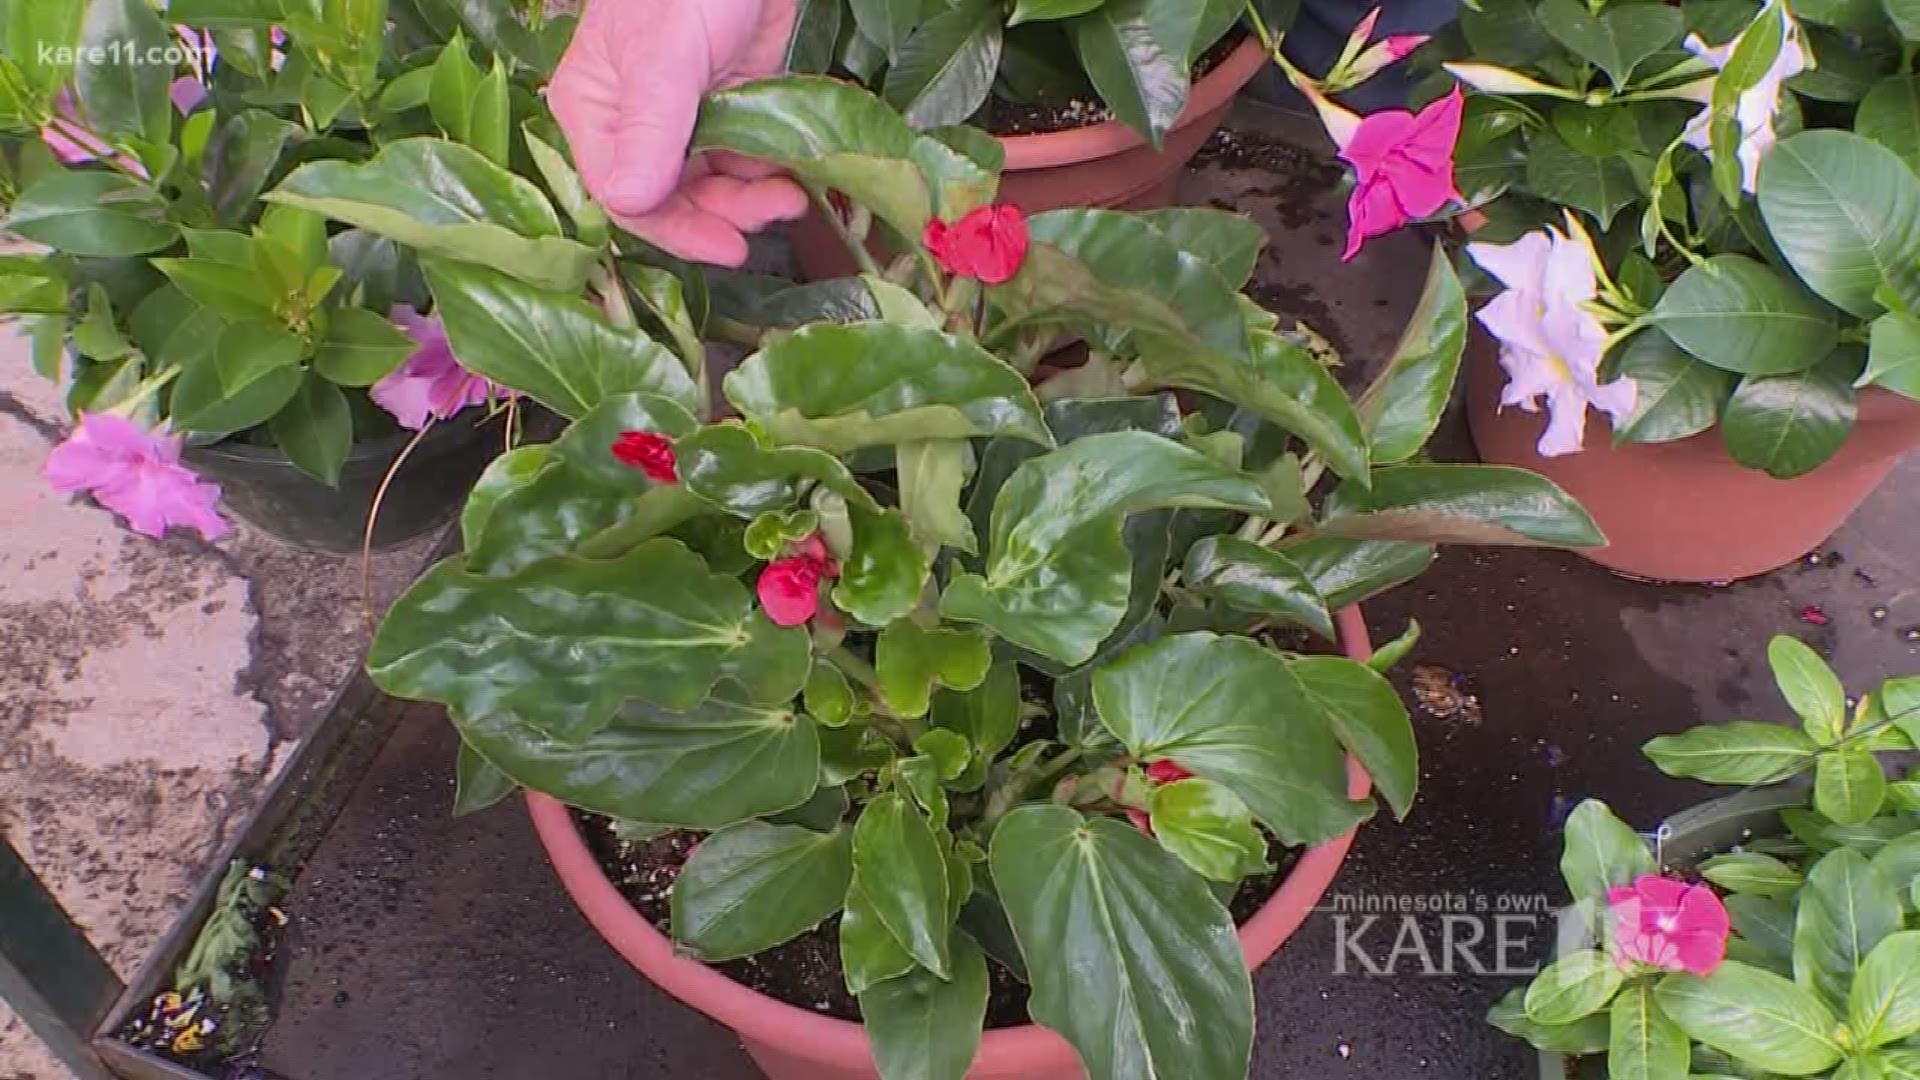 Grow with KARE: Plants for the Cabin